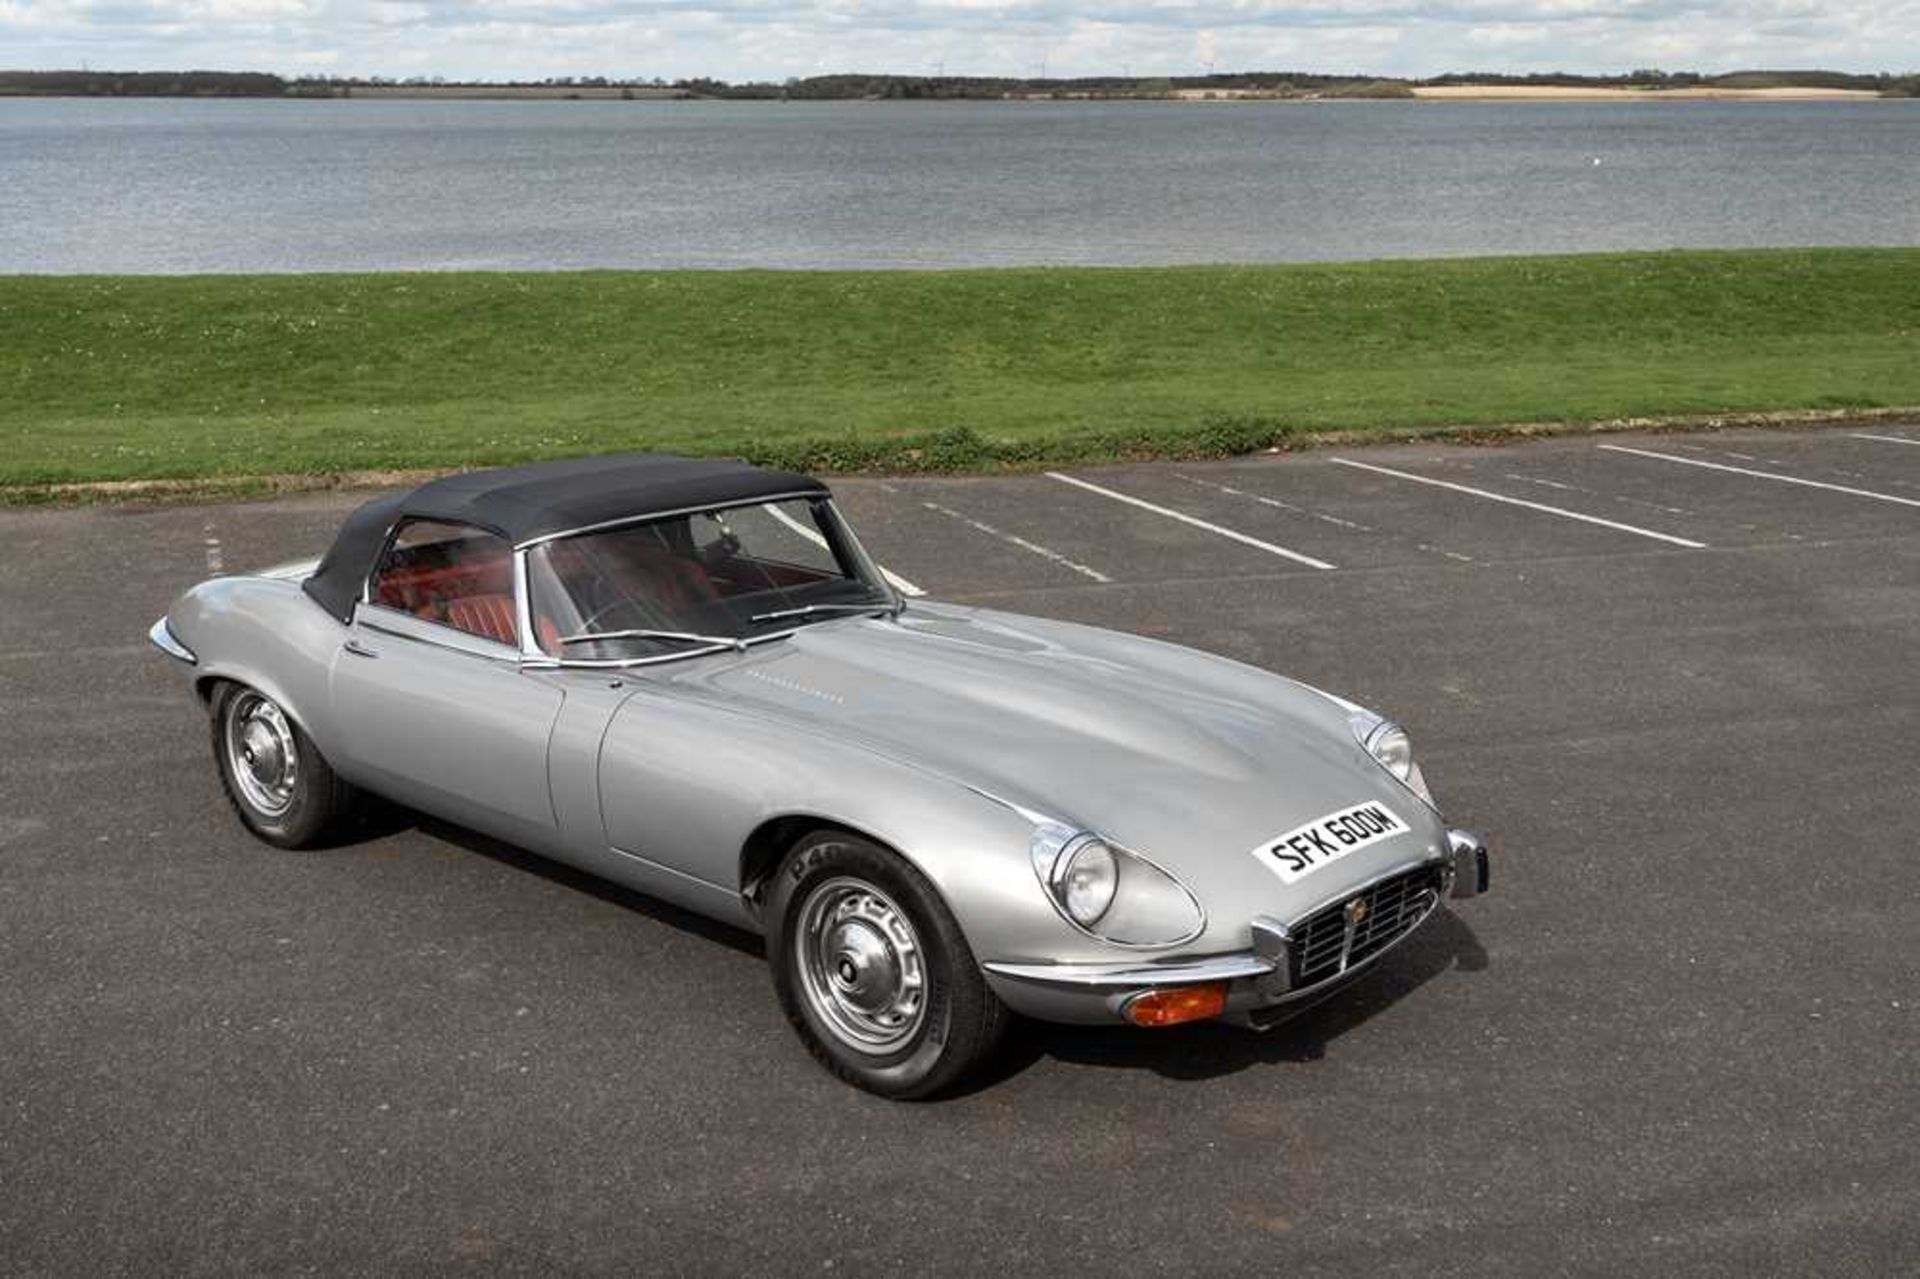 1974 Jaguar E-Type Series III V12 Roadster Only one family owner and 54,412 miles from new - Image 43 of 89